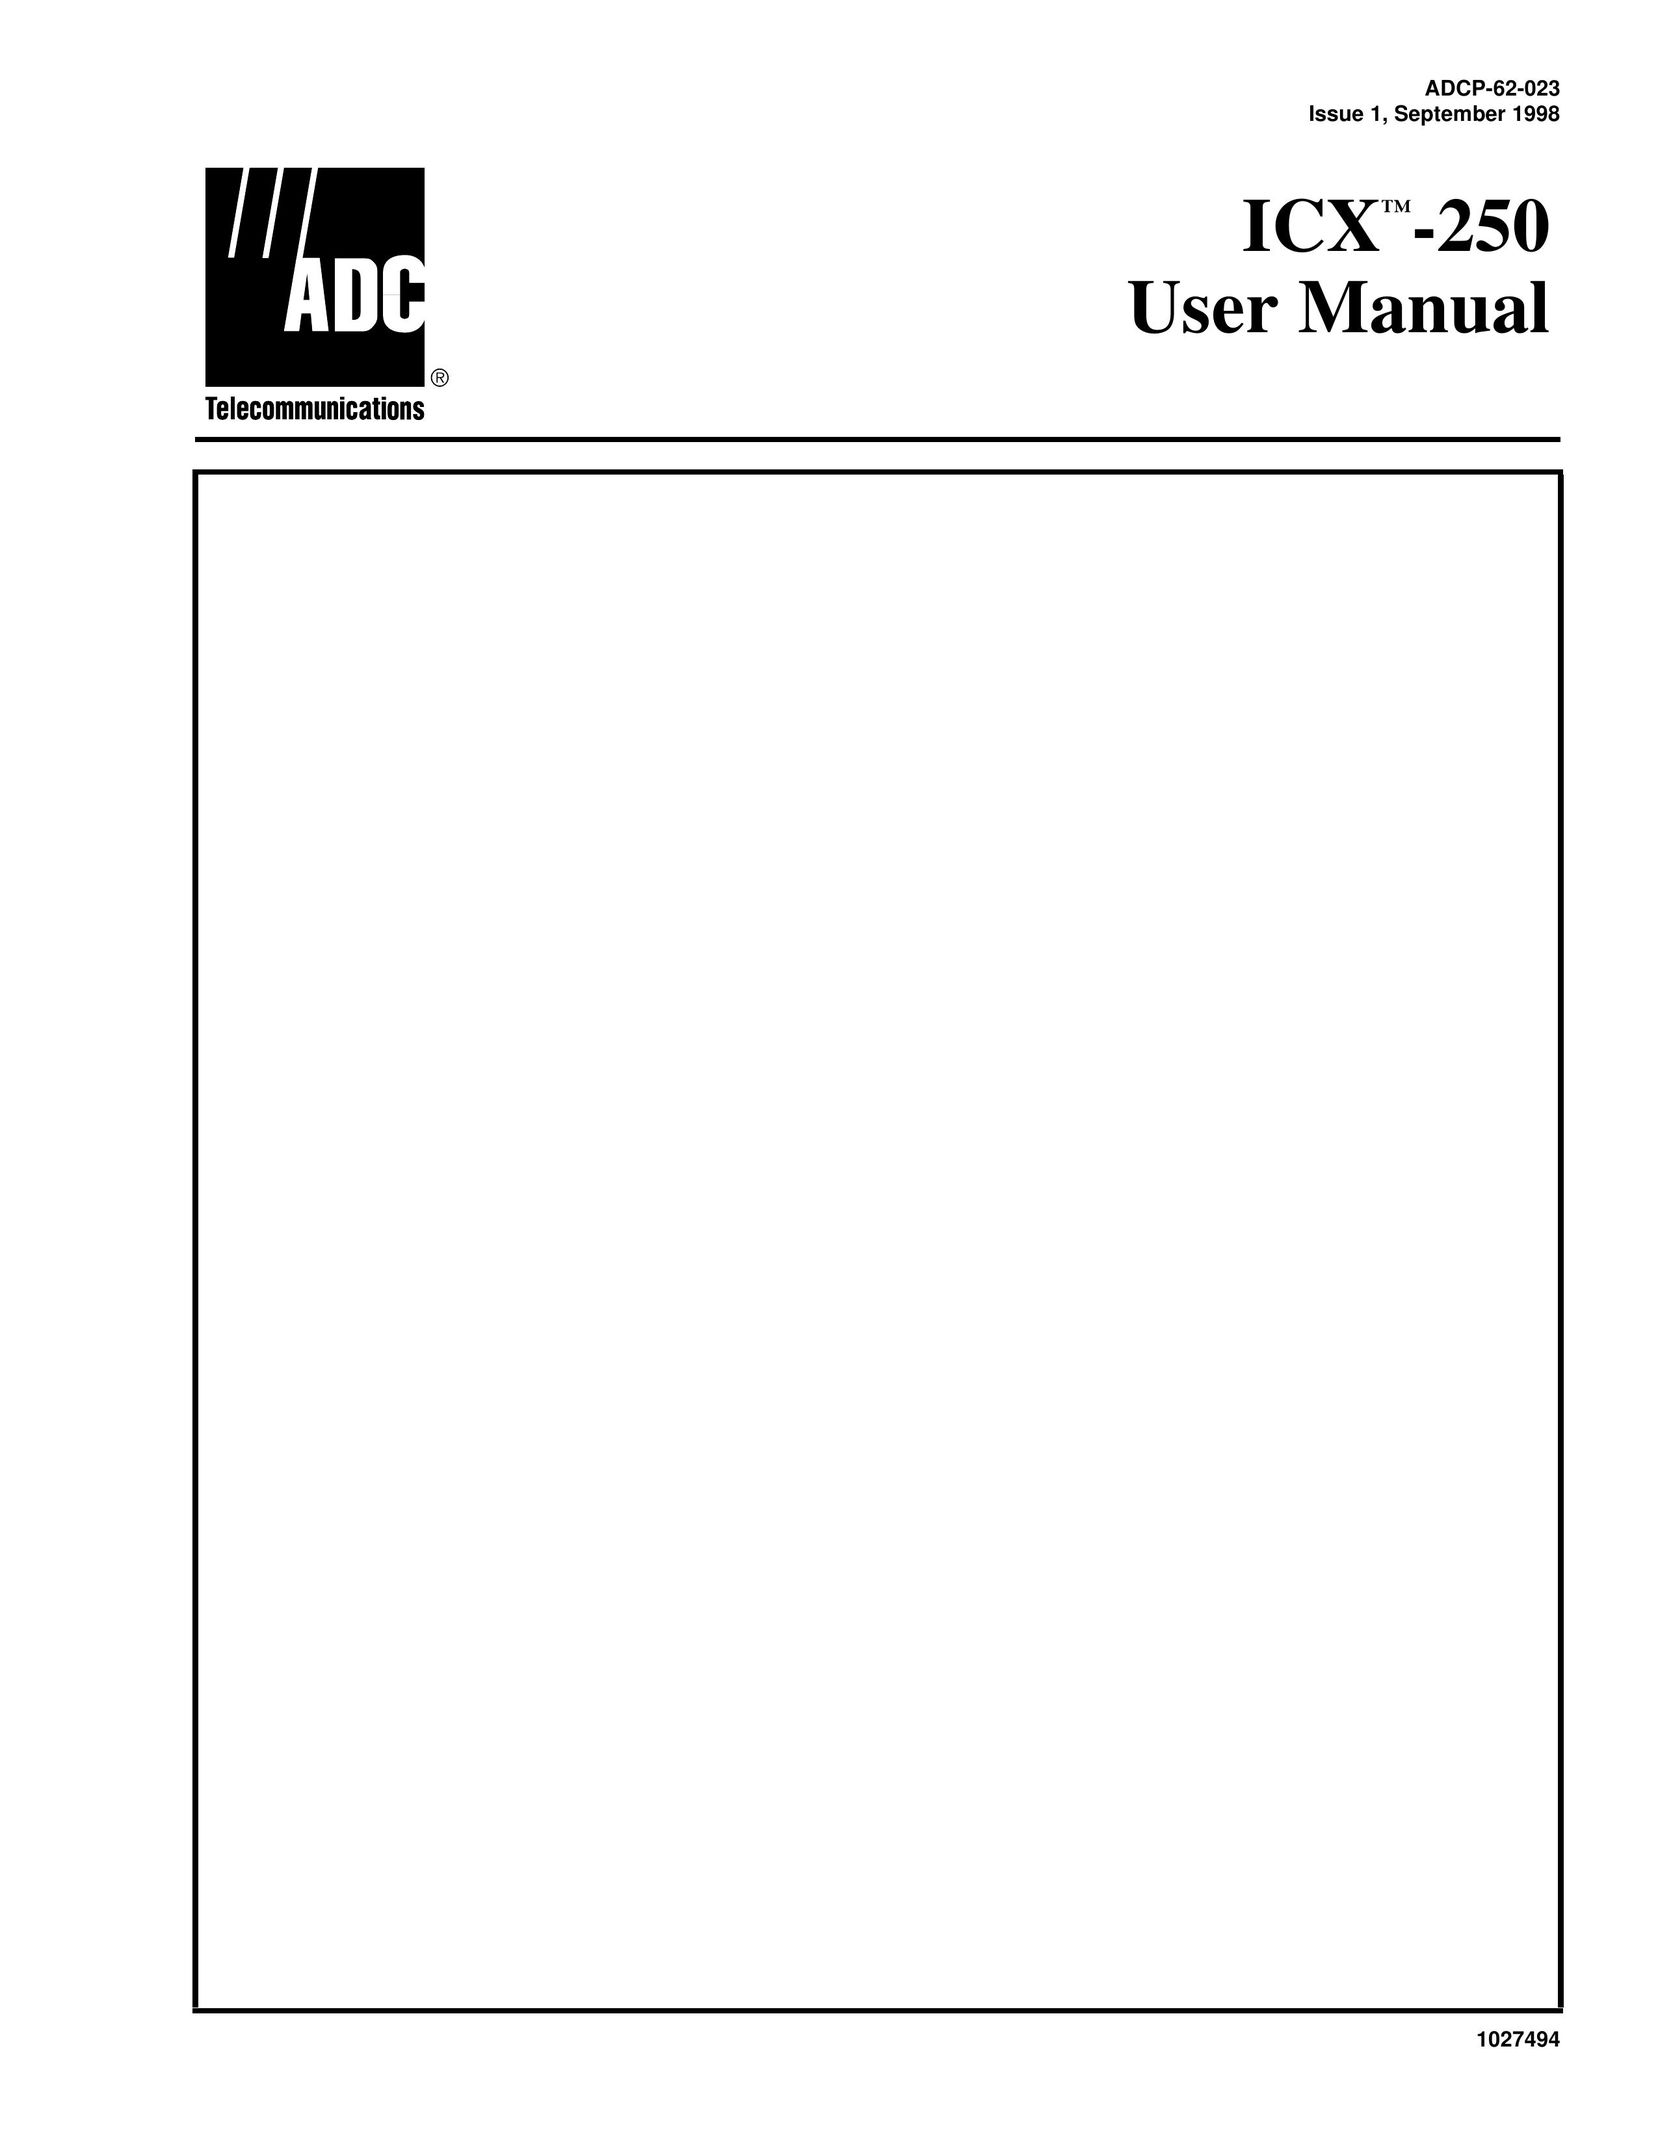 ADC ICX-250 Switch User Manual